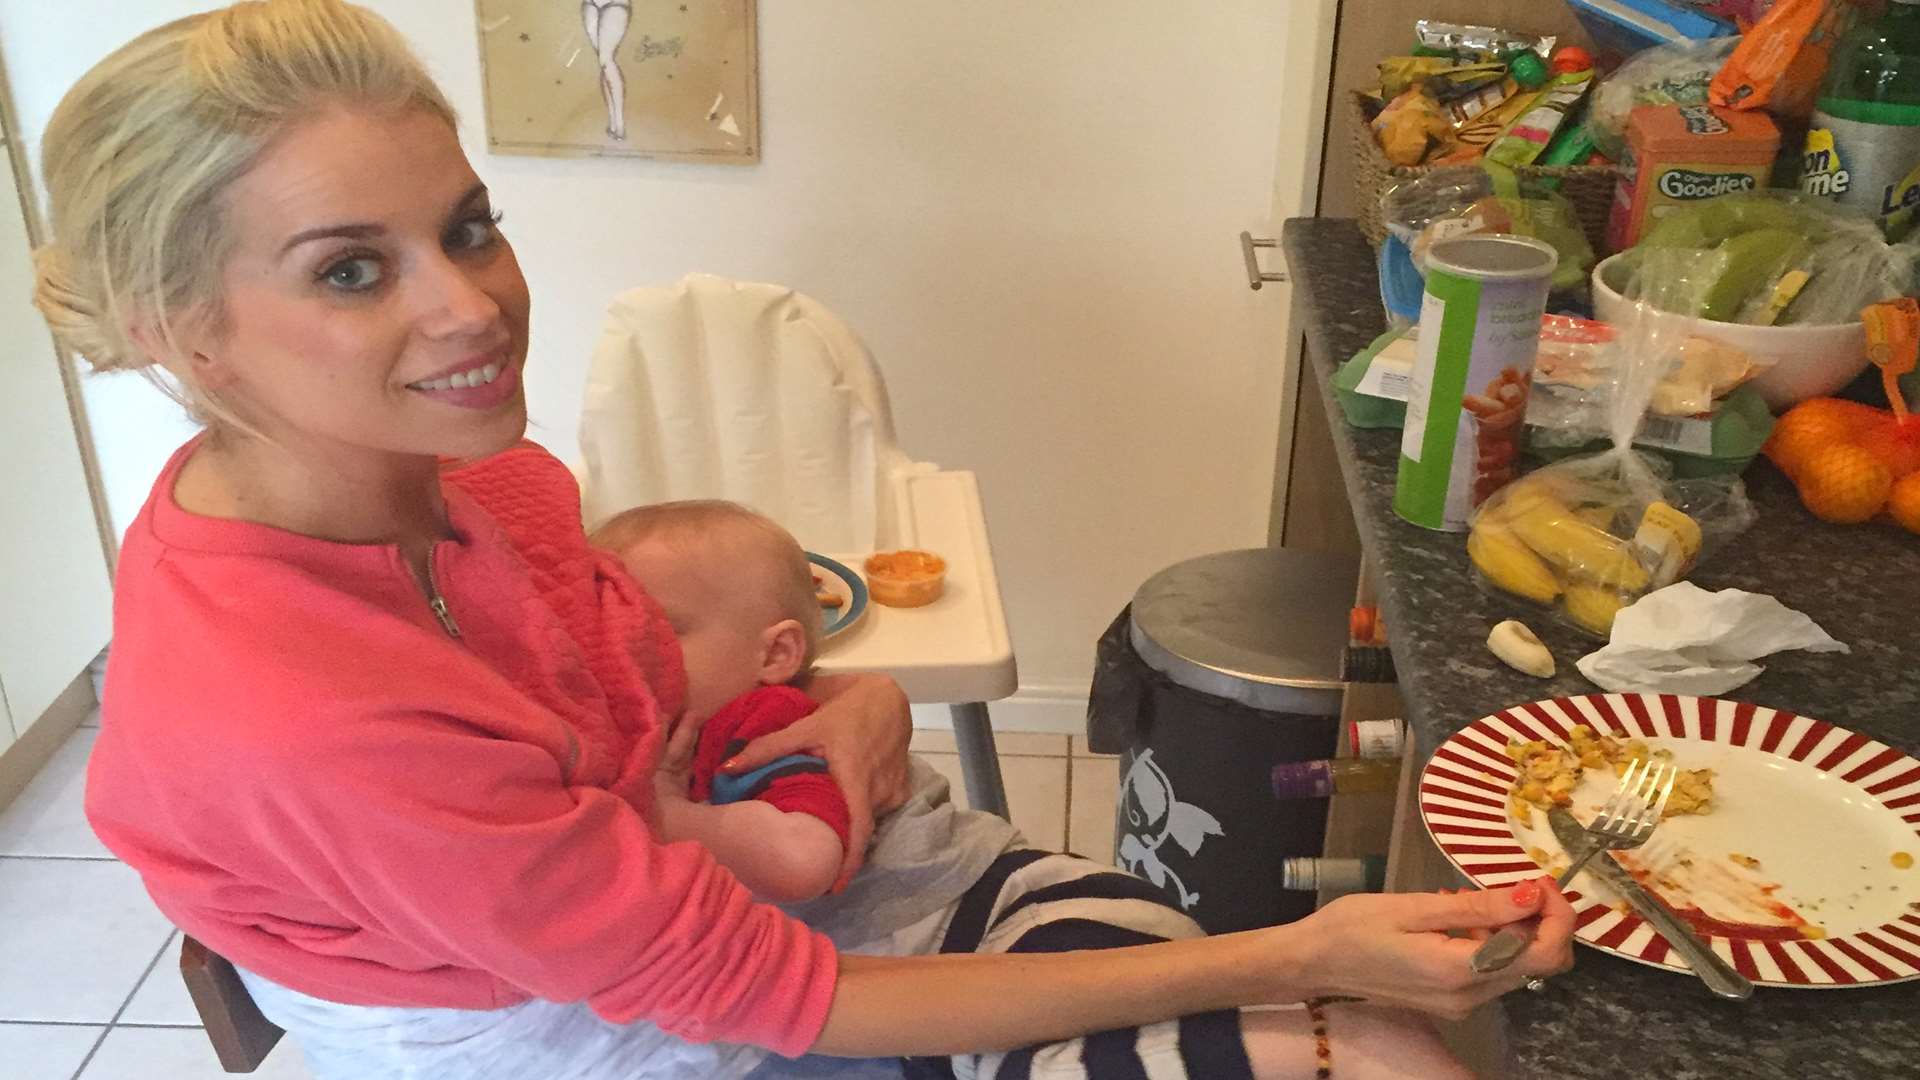 Charlie's final breastfeed with Noah